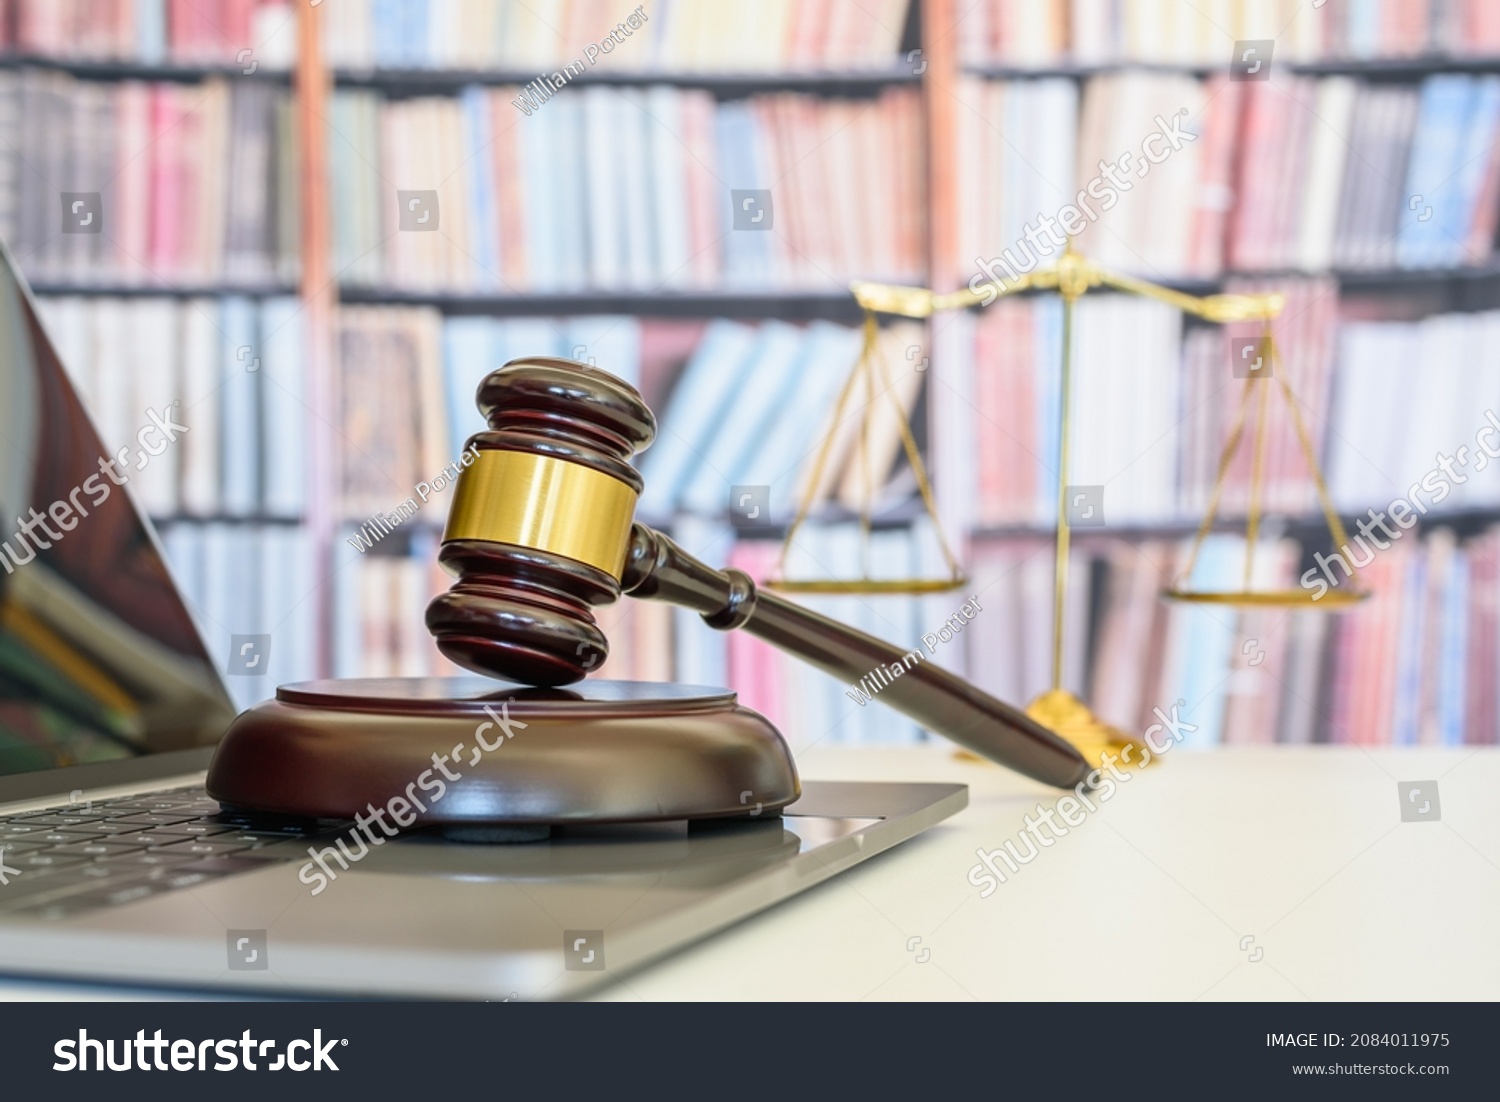 Legal office of lawyers, justice and law concept : Judge gavel or a hammer and a base used by a judge person on a desk in a courtroom with blurred weight scale of justice. #2084011975